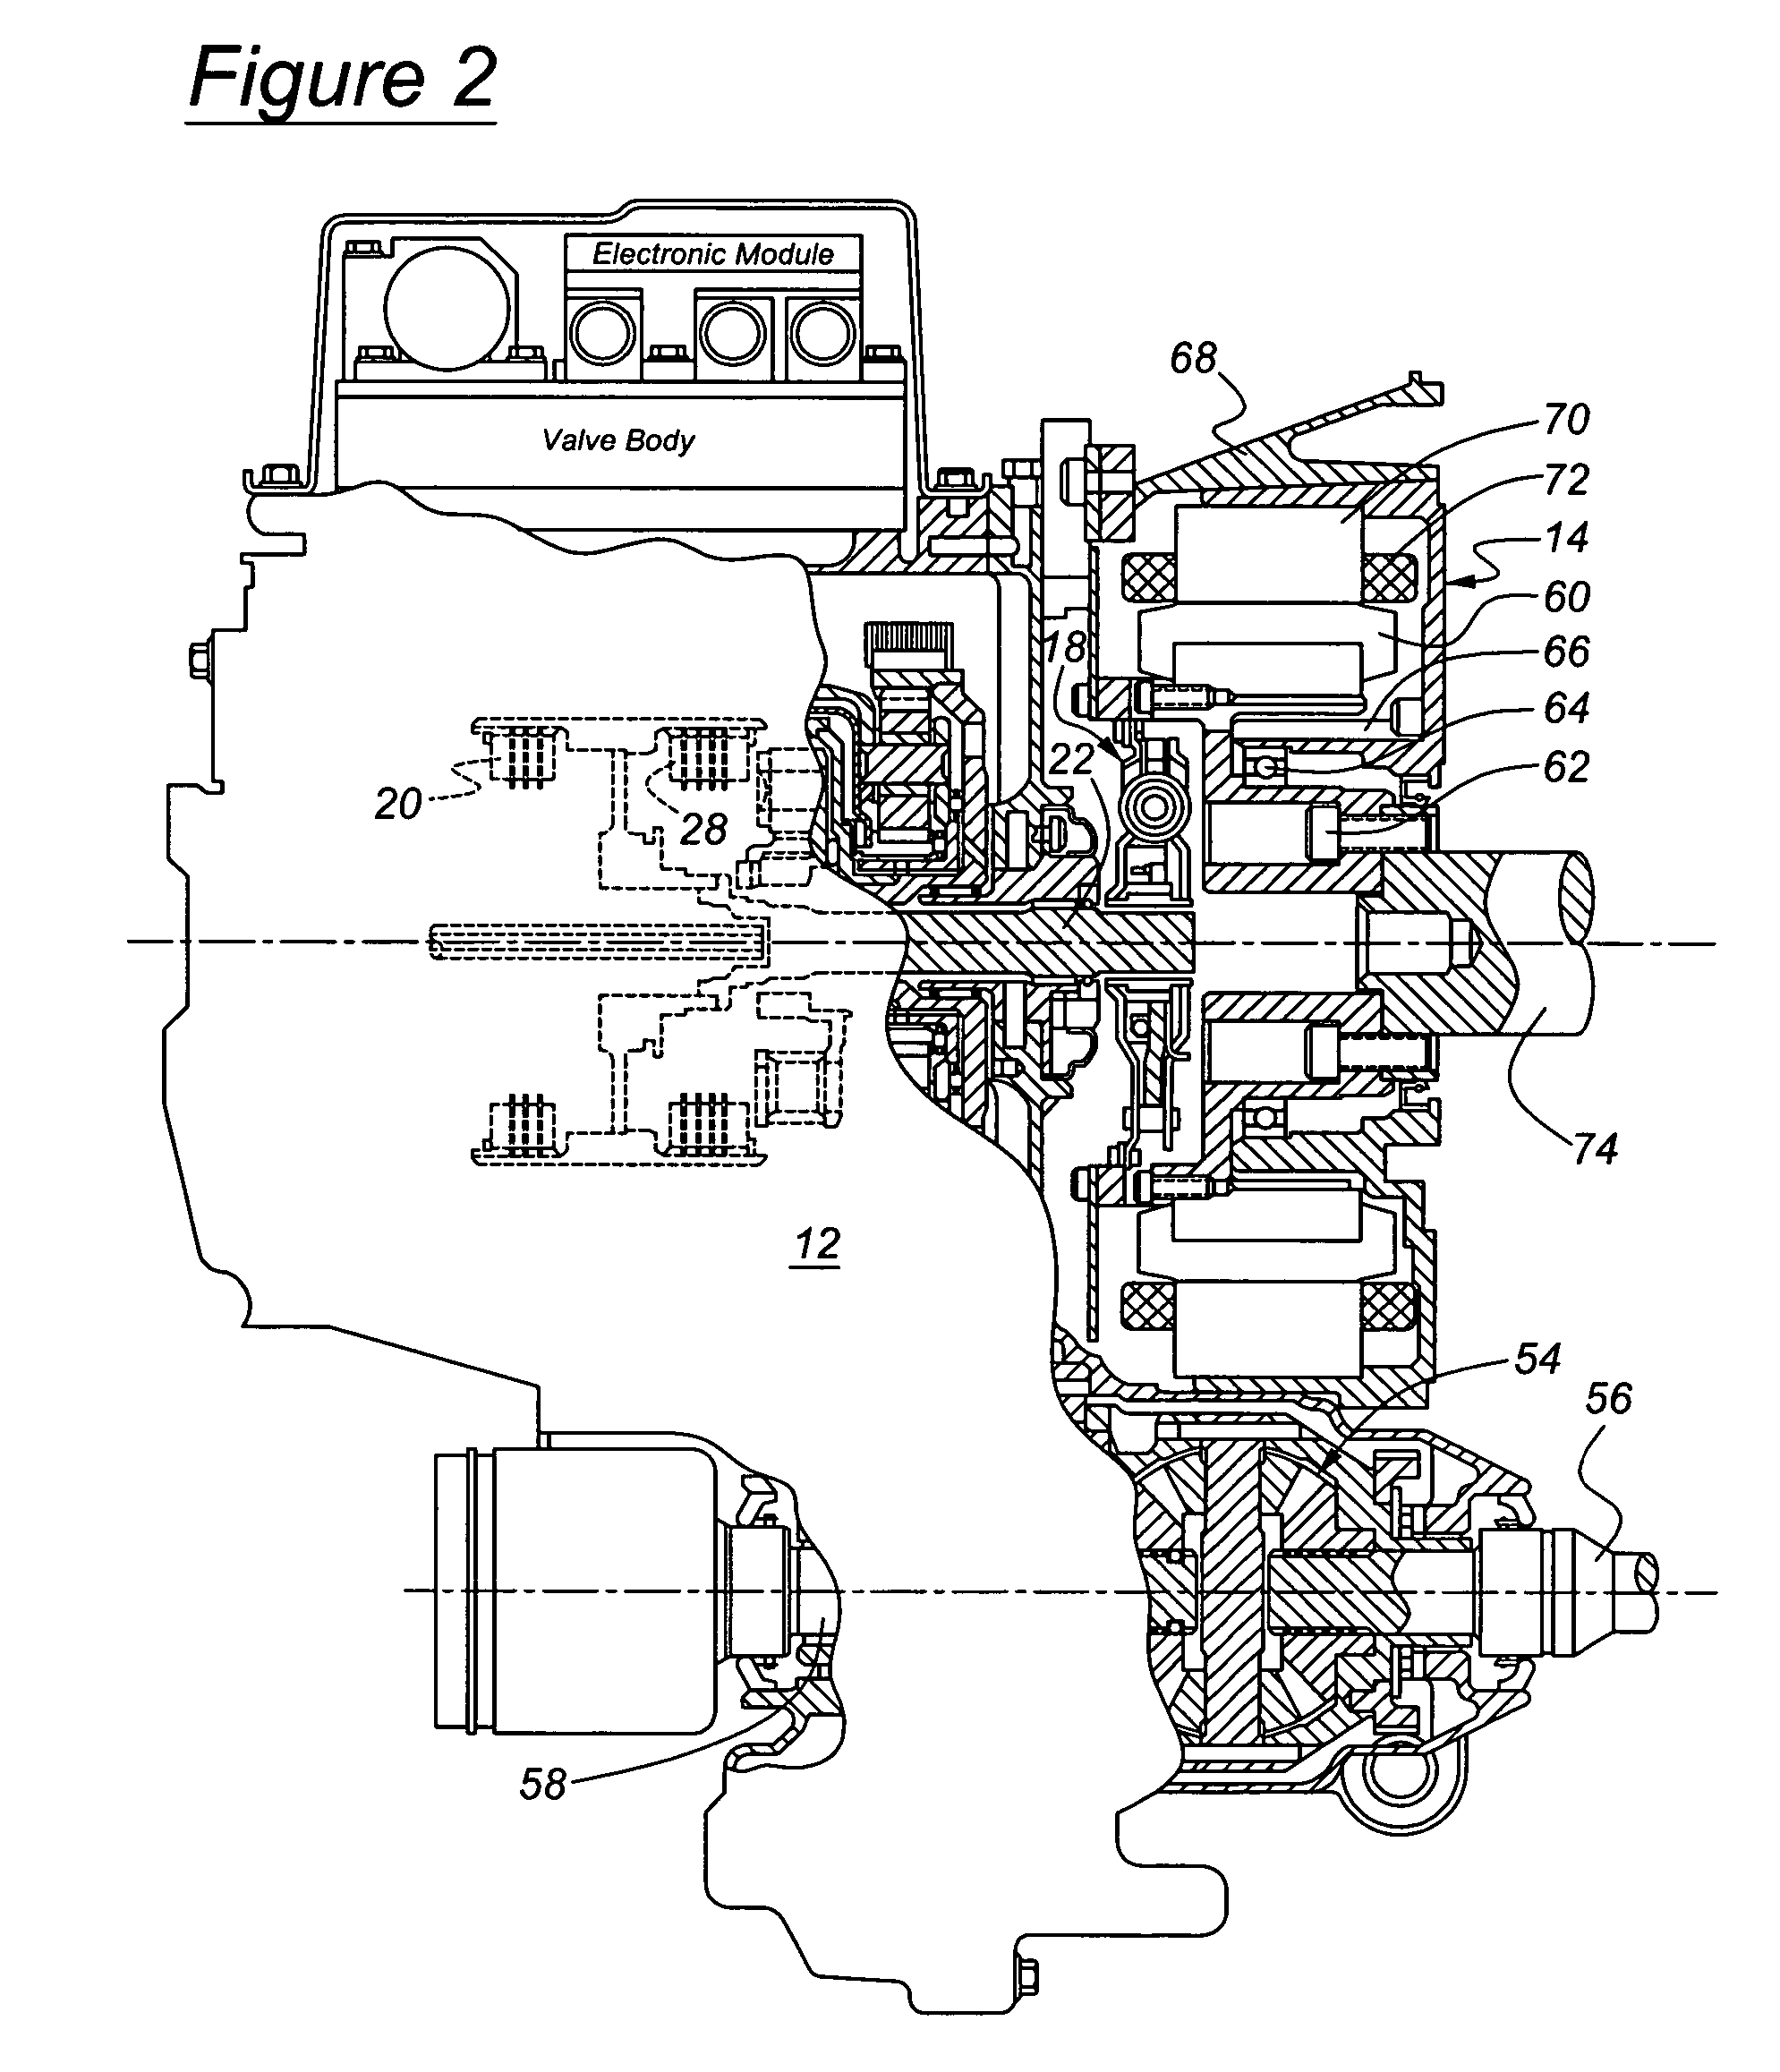 Torsional isolation of a convertless automatic transmission through slip control of friction clutch